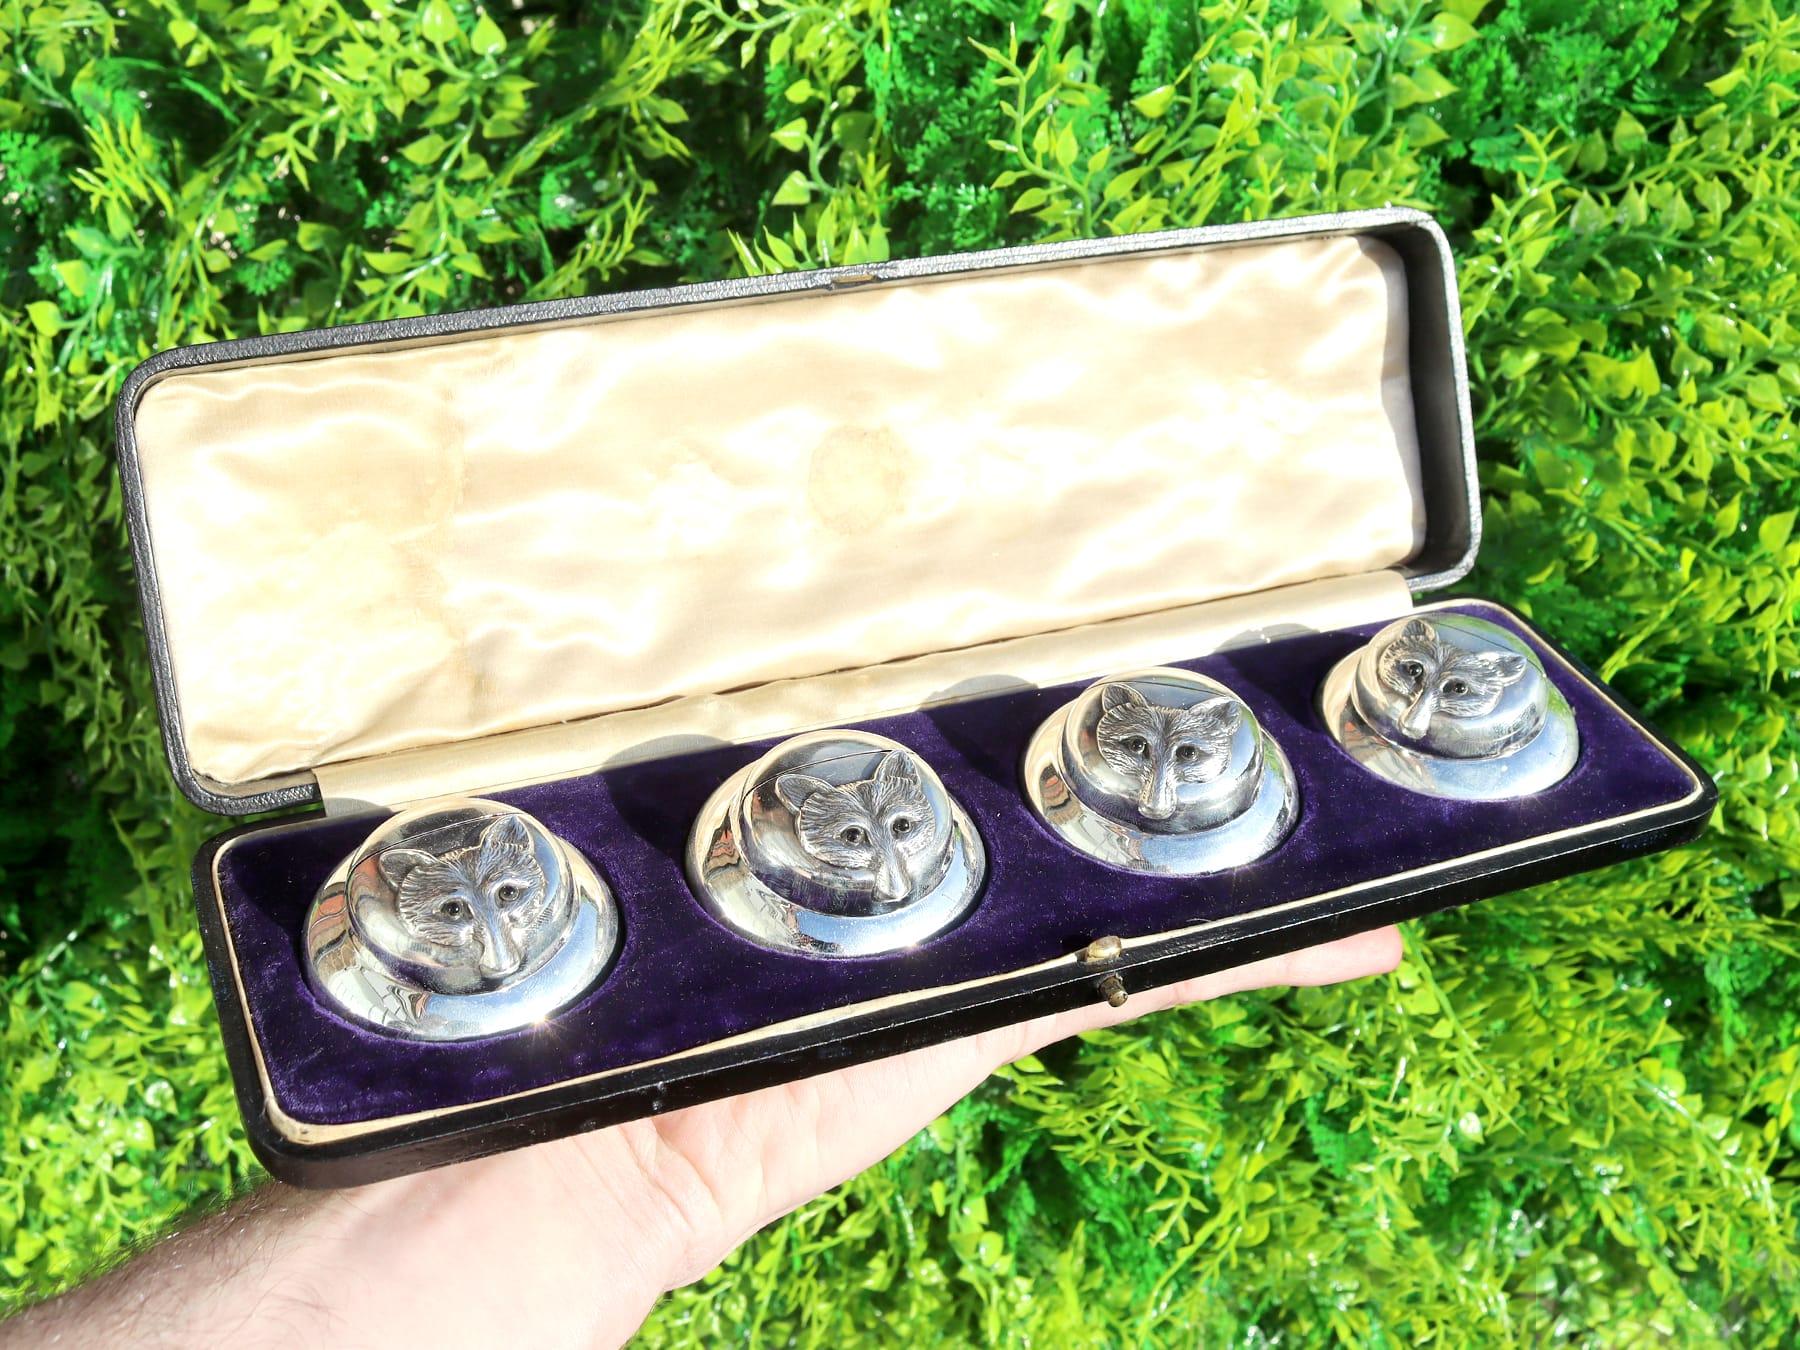 An exceptional, fine and impressive set of four antique Edwardian English sterling silver menu / card holders, boxed, an addition to our diverse dining silverware collection.

These exceptional and rare antique Edwardian cast sterling silver